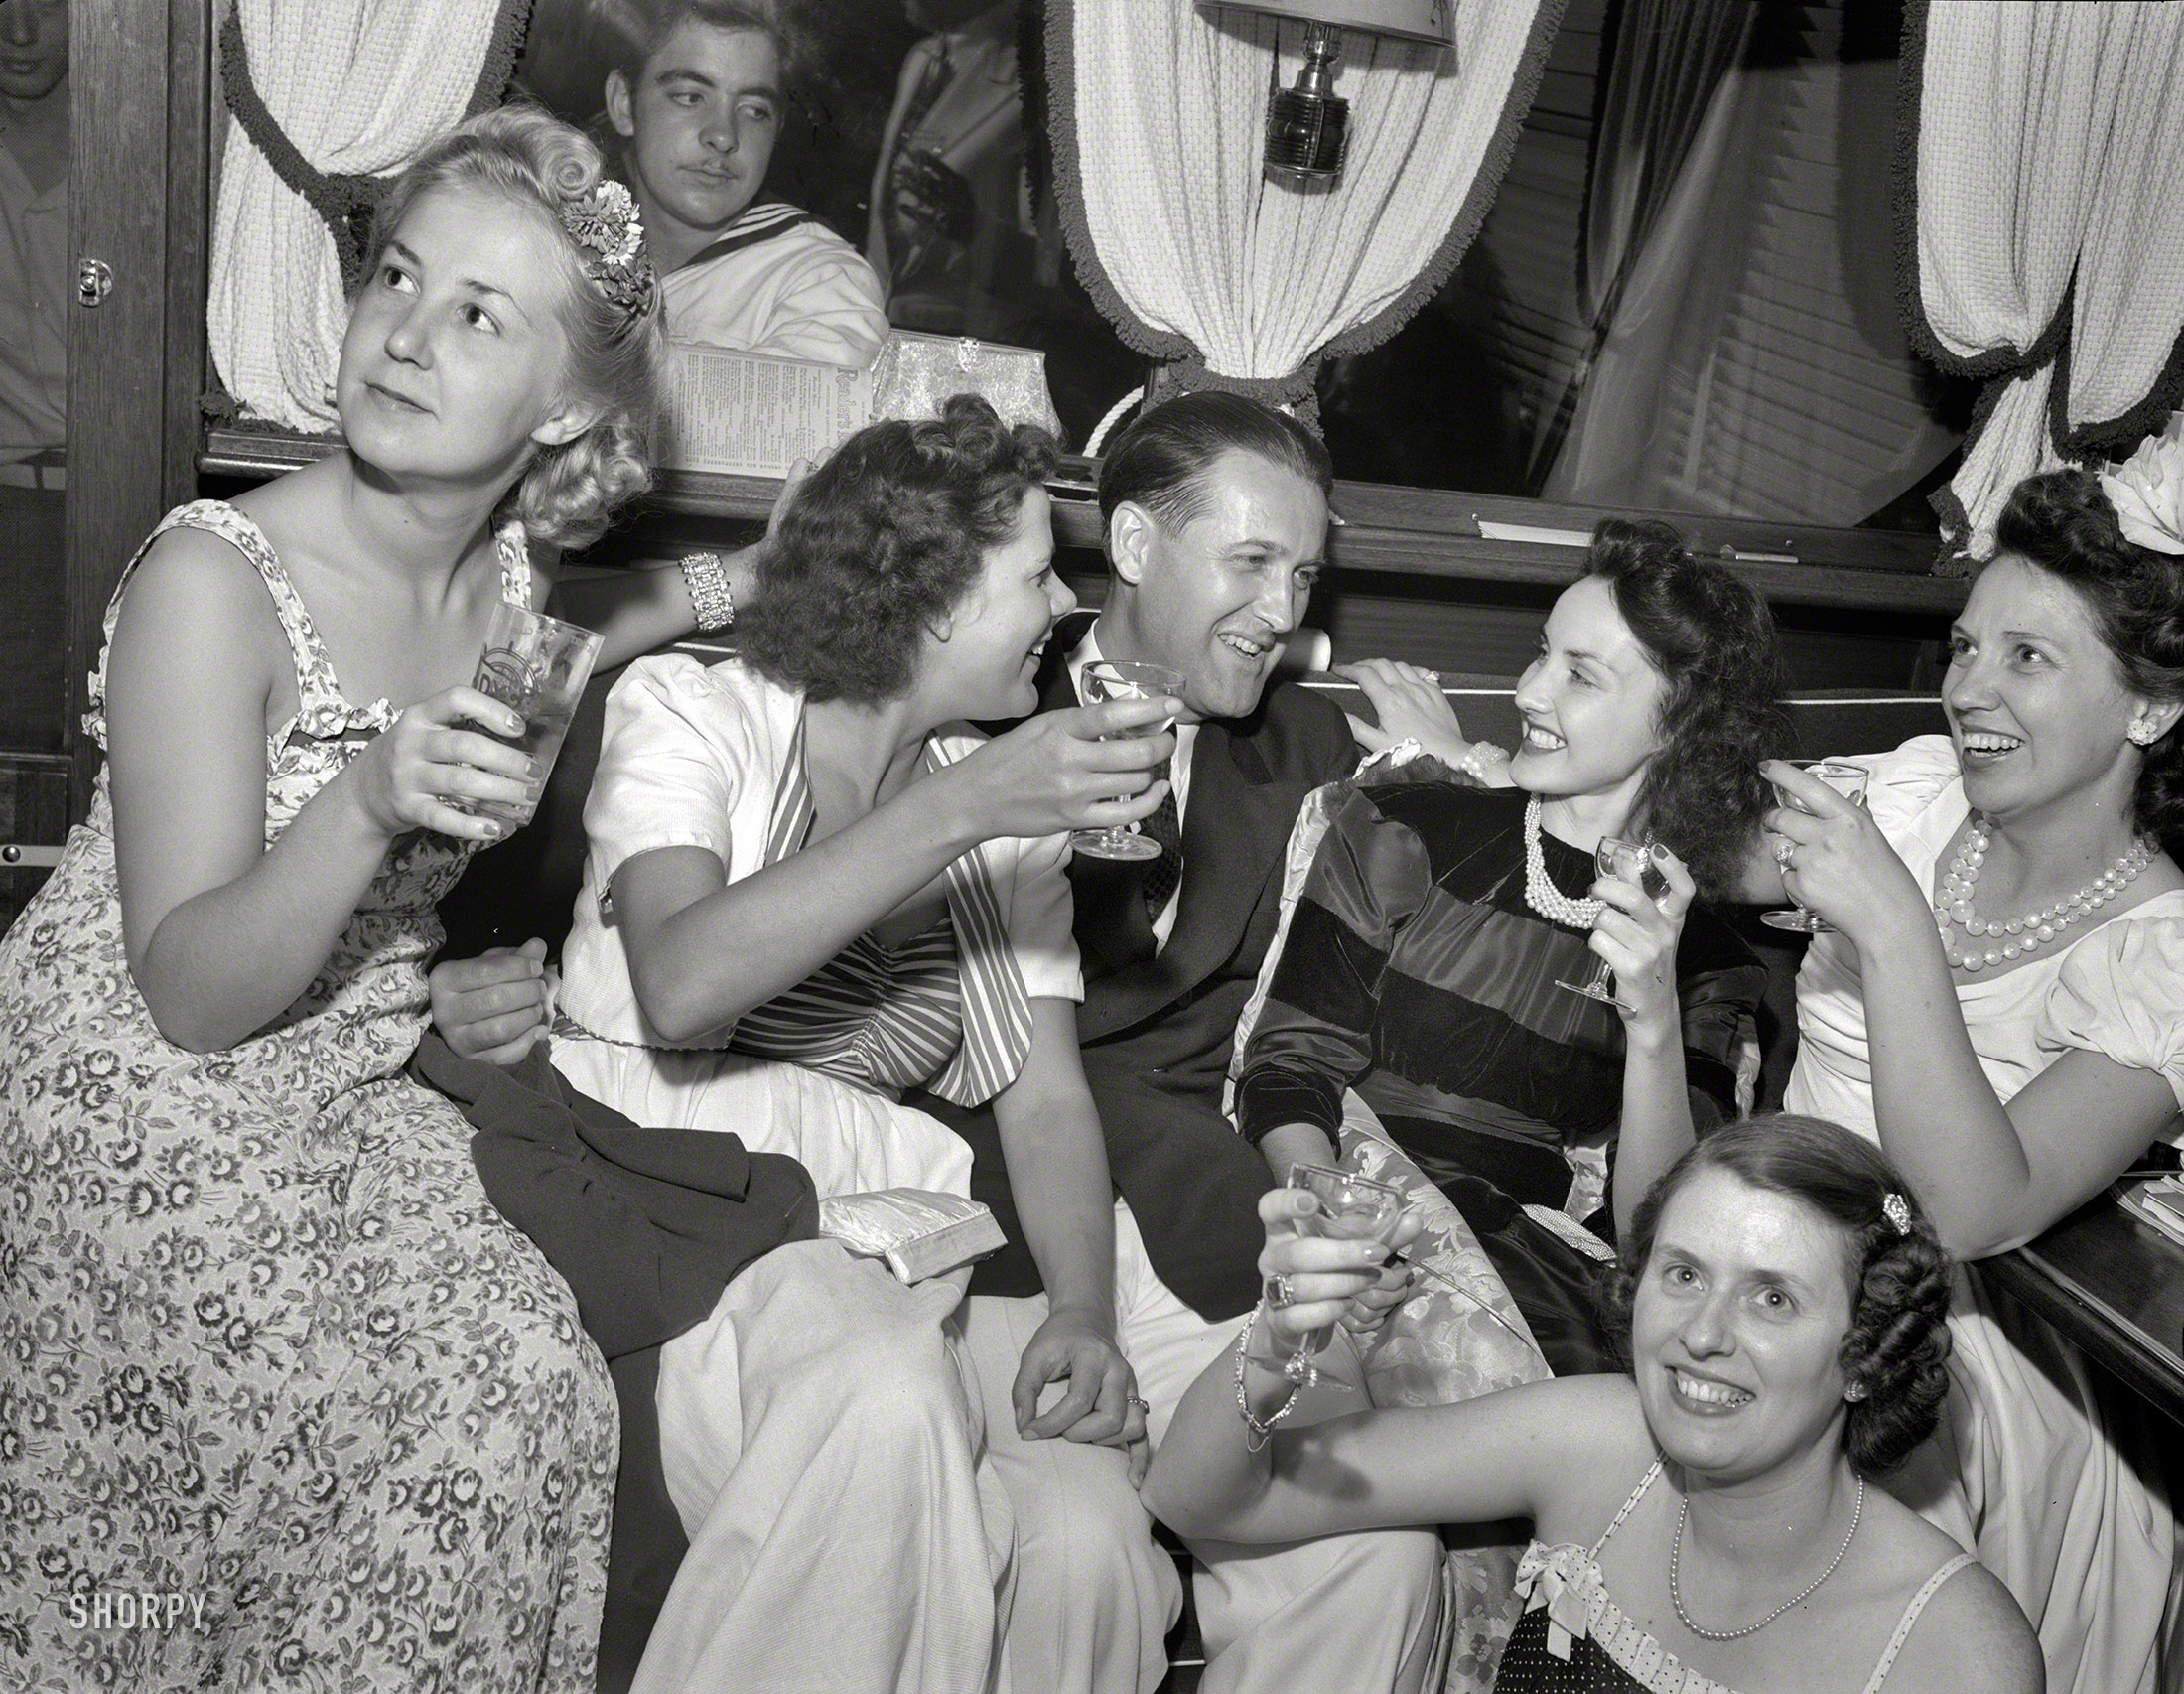 Summer 1940. "'Venetian Night' party at the Detroit Yacht Club, whose members represent the wealthier class of manufacturers. Commodore and girls drinking." Happy New Year from Shorpy! Photo by Arthur Siegel. View full size.